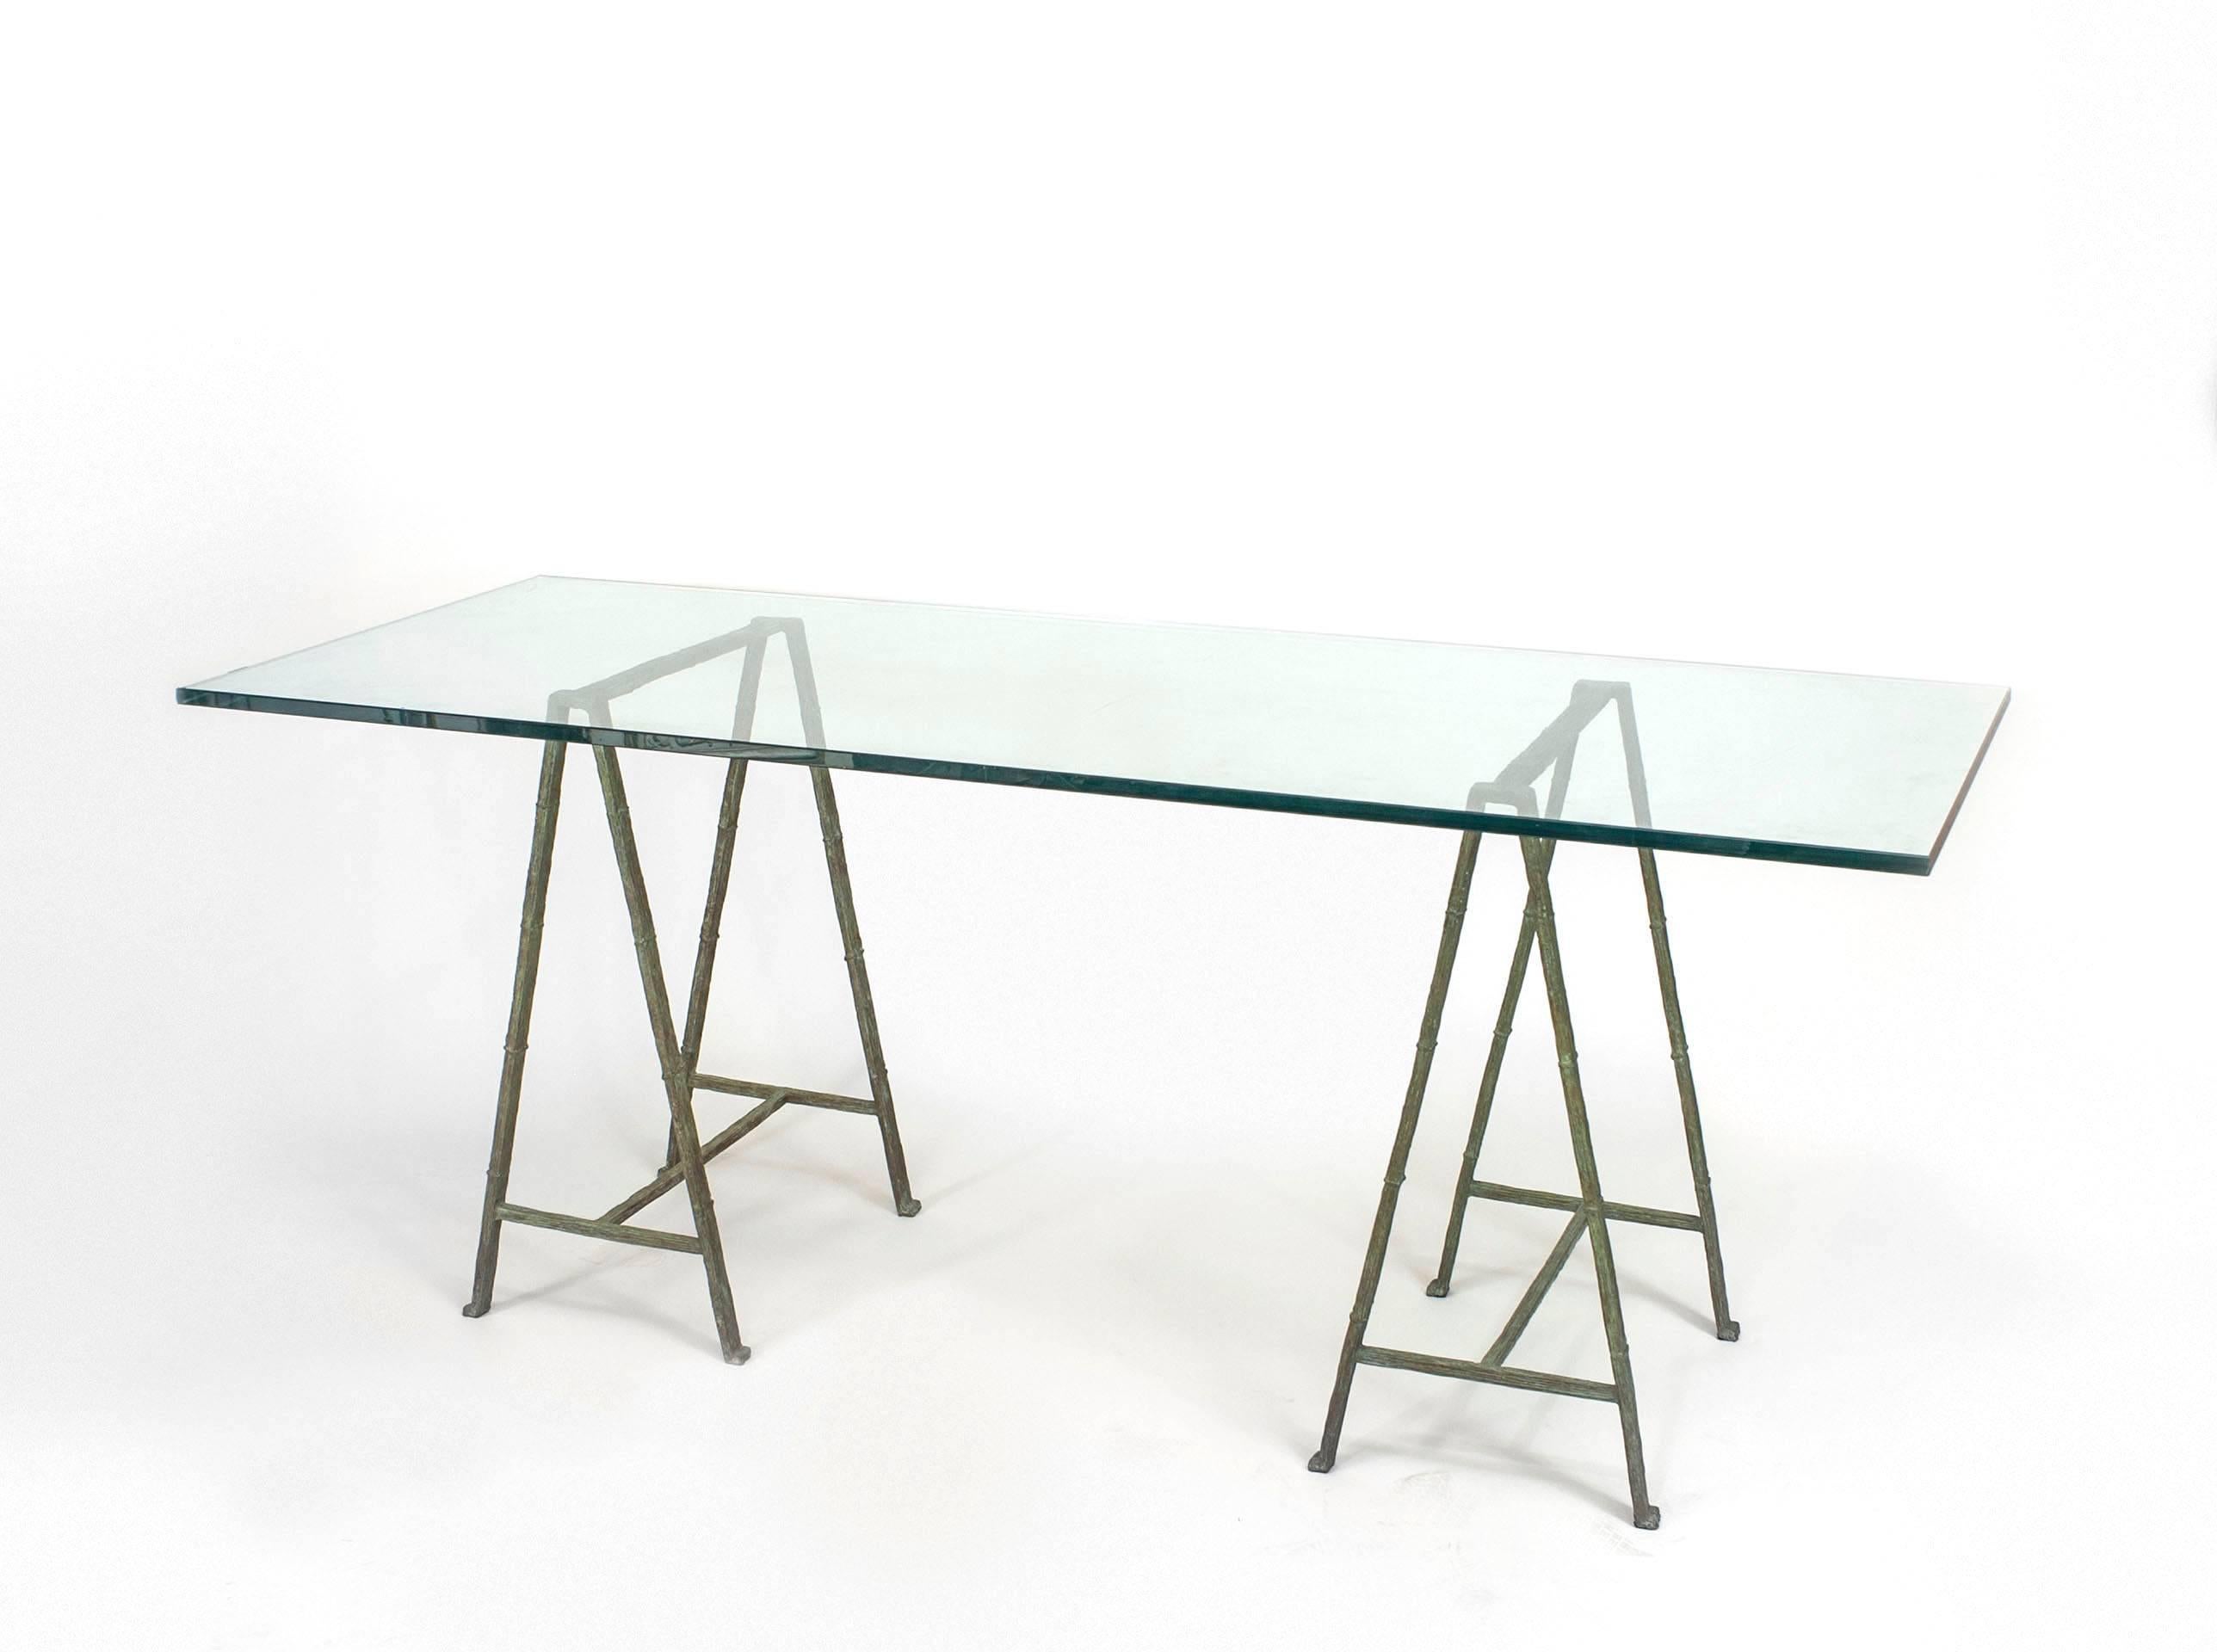 Post-War Design Giacometti style table desk with a Pair of verdigris patina bronze 